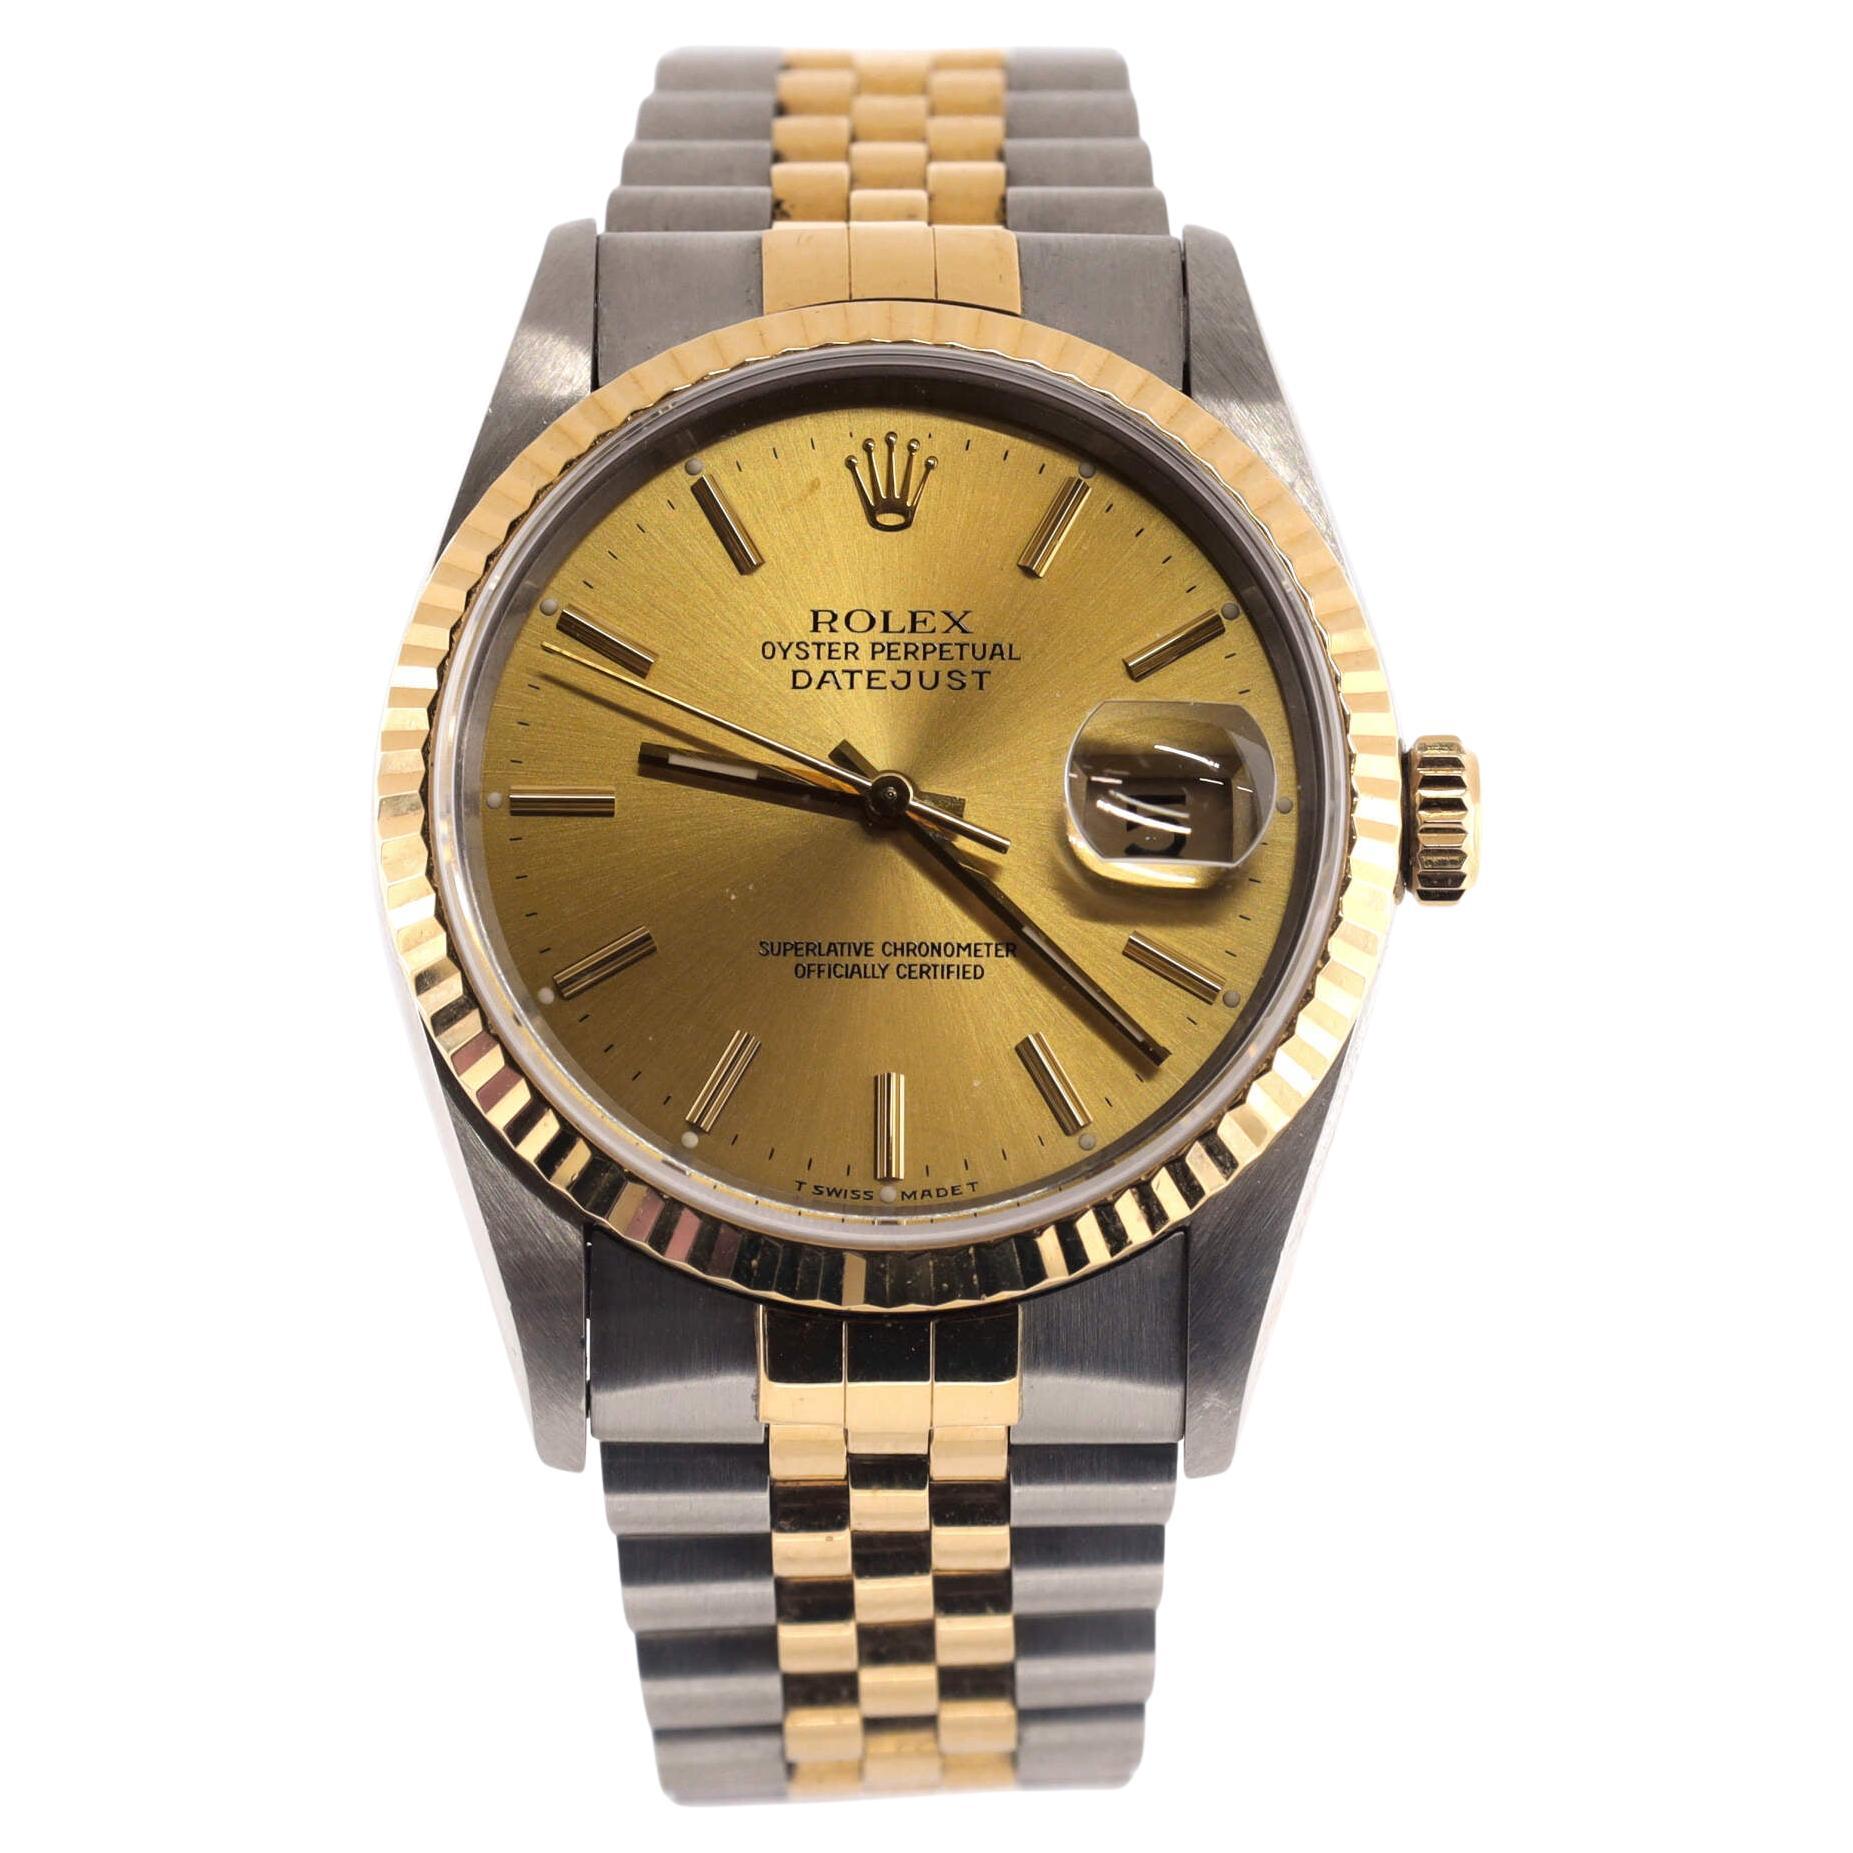 Rolex Oyster Perpetual Datejust Automatic Watch Stainless Steel and Yellow  Gold at 1stDibs | rolex oyster perpetual datejust superlative chronometer  officially certified, rolex 1912